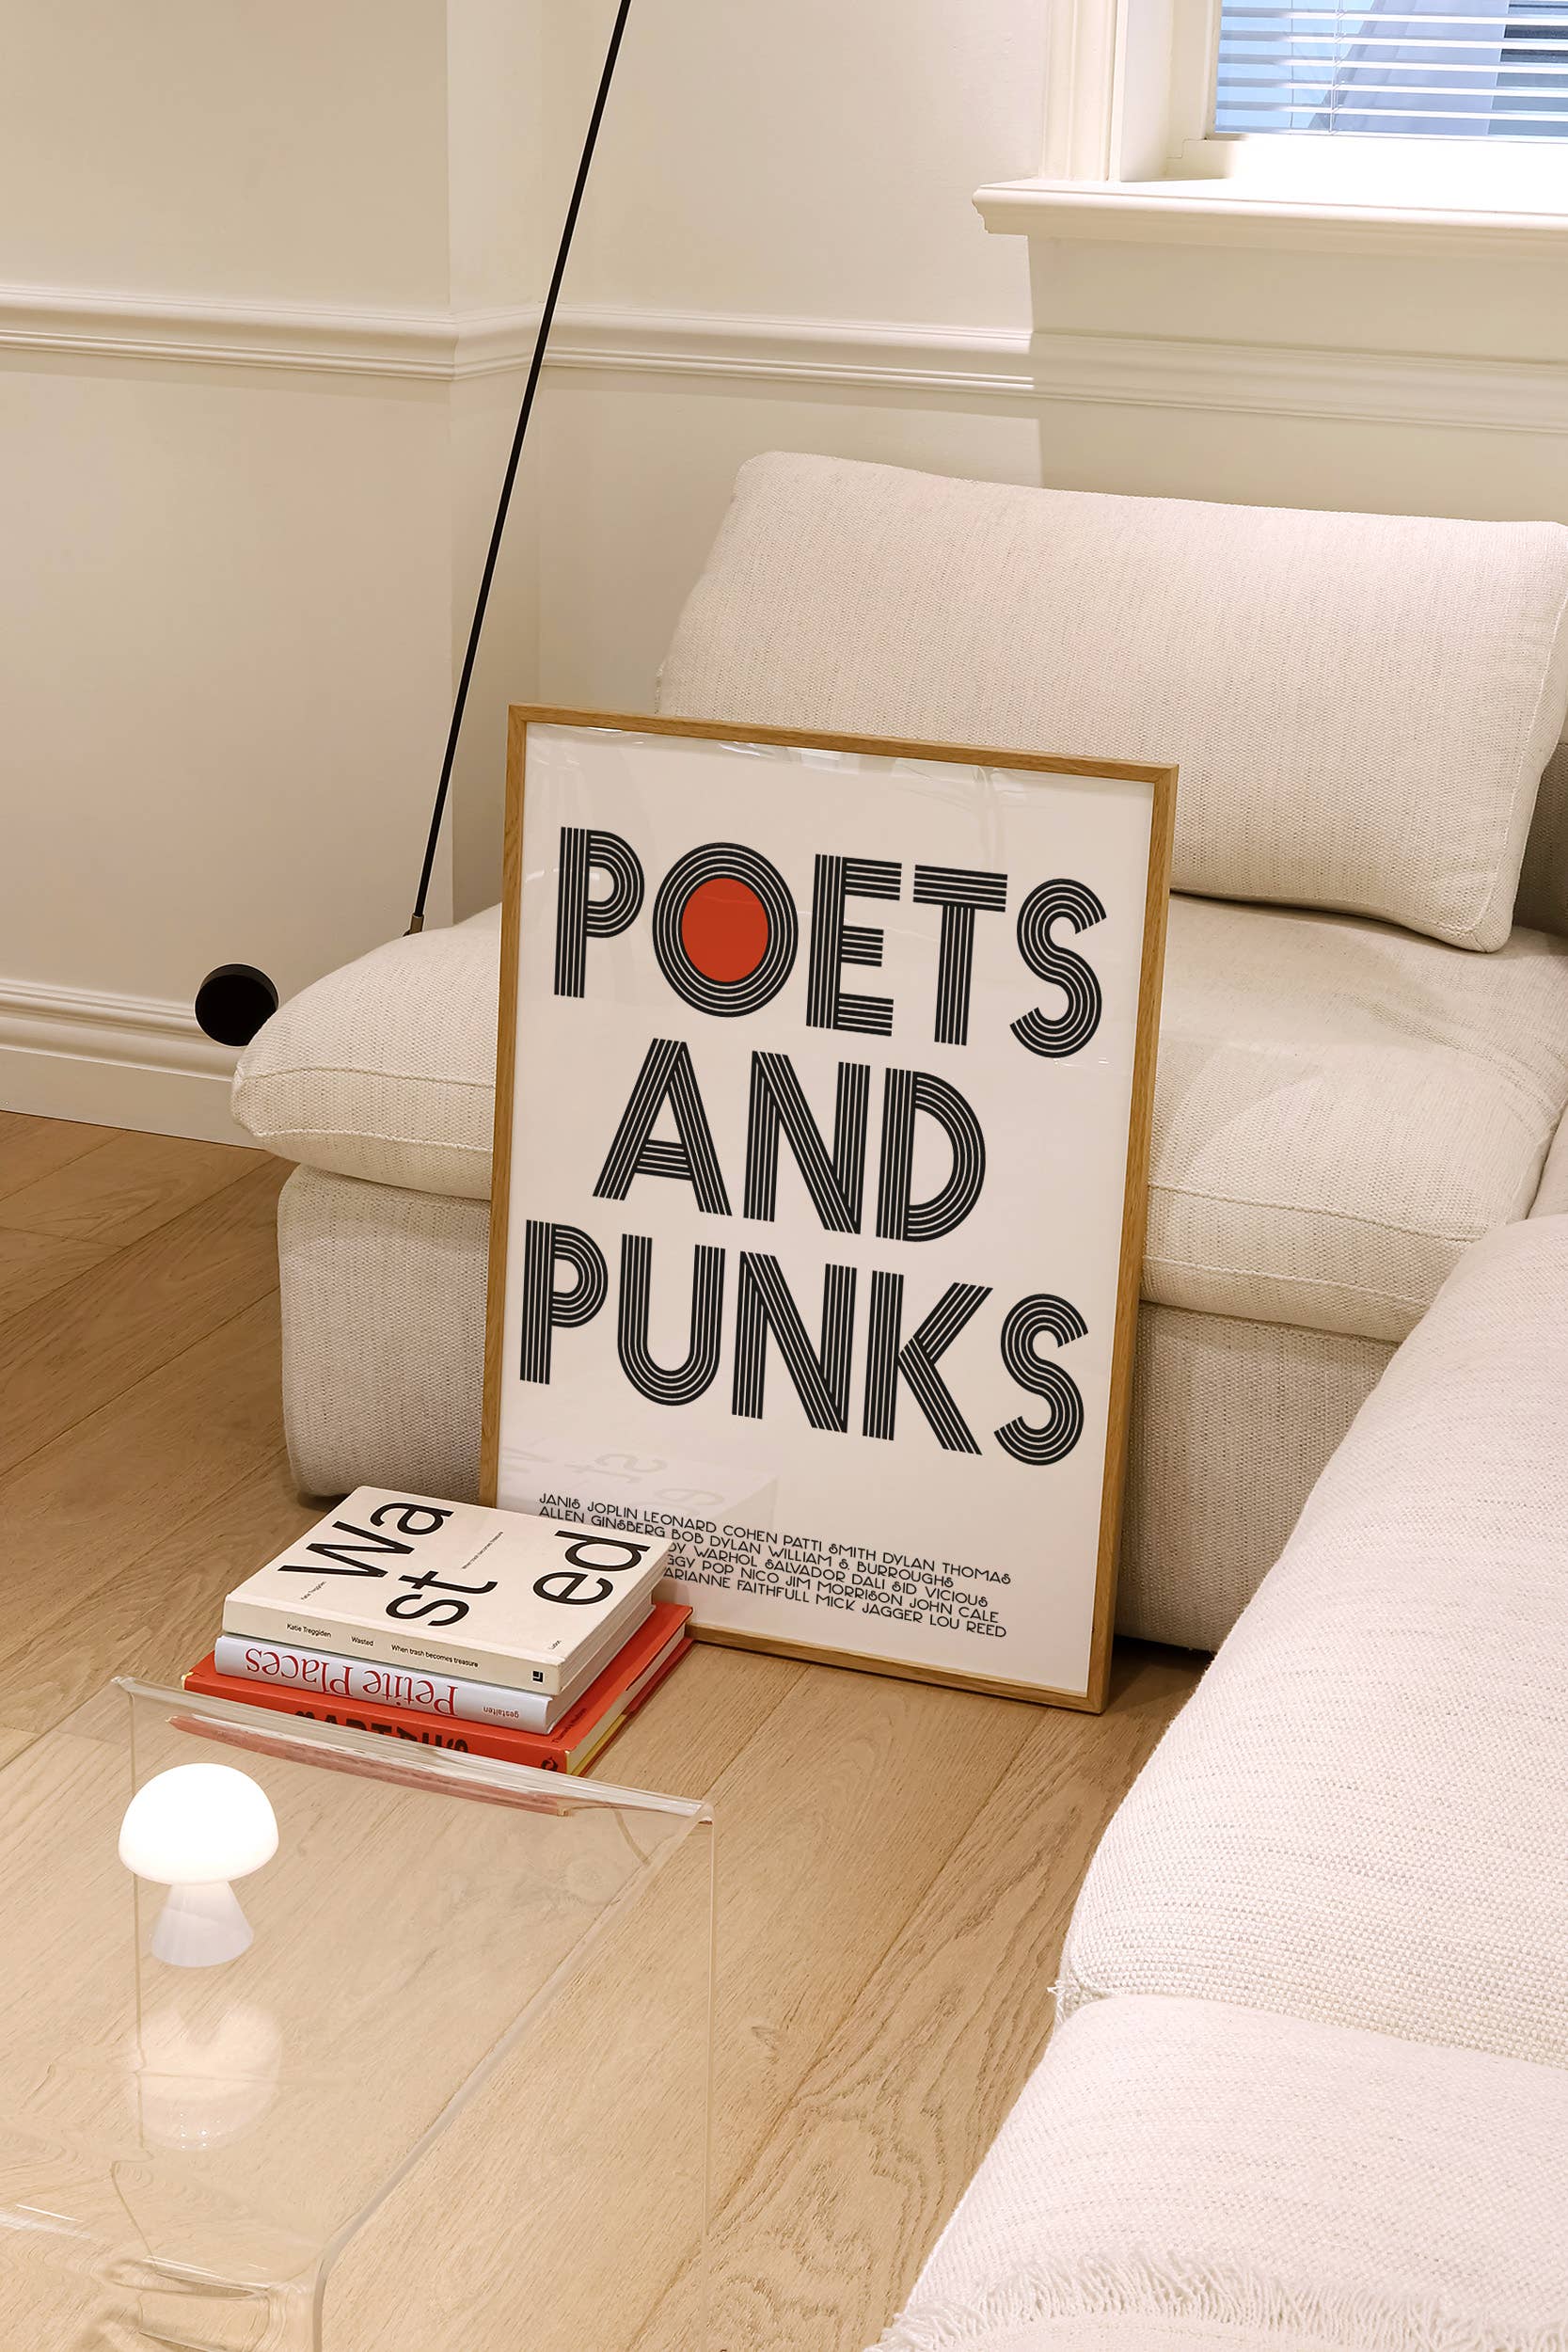 Poets and Punks Art Giclée Print - Out of the Blue